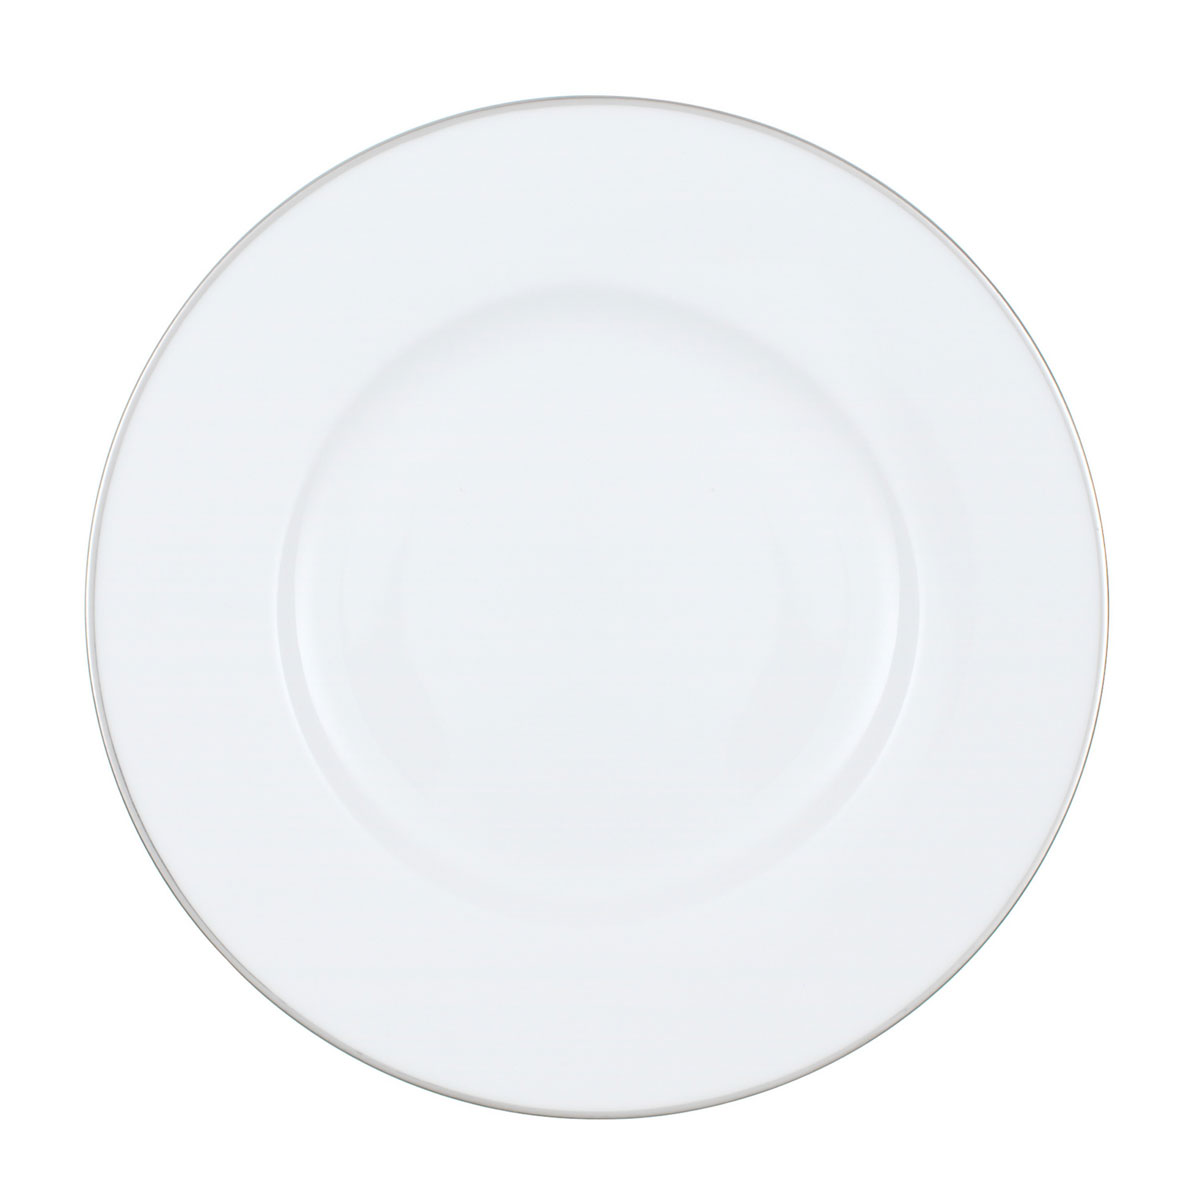 Villeroy and Boch Anmut Platinum No1 Bread and Butter Plate, Single